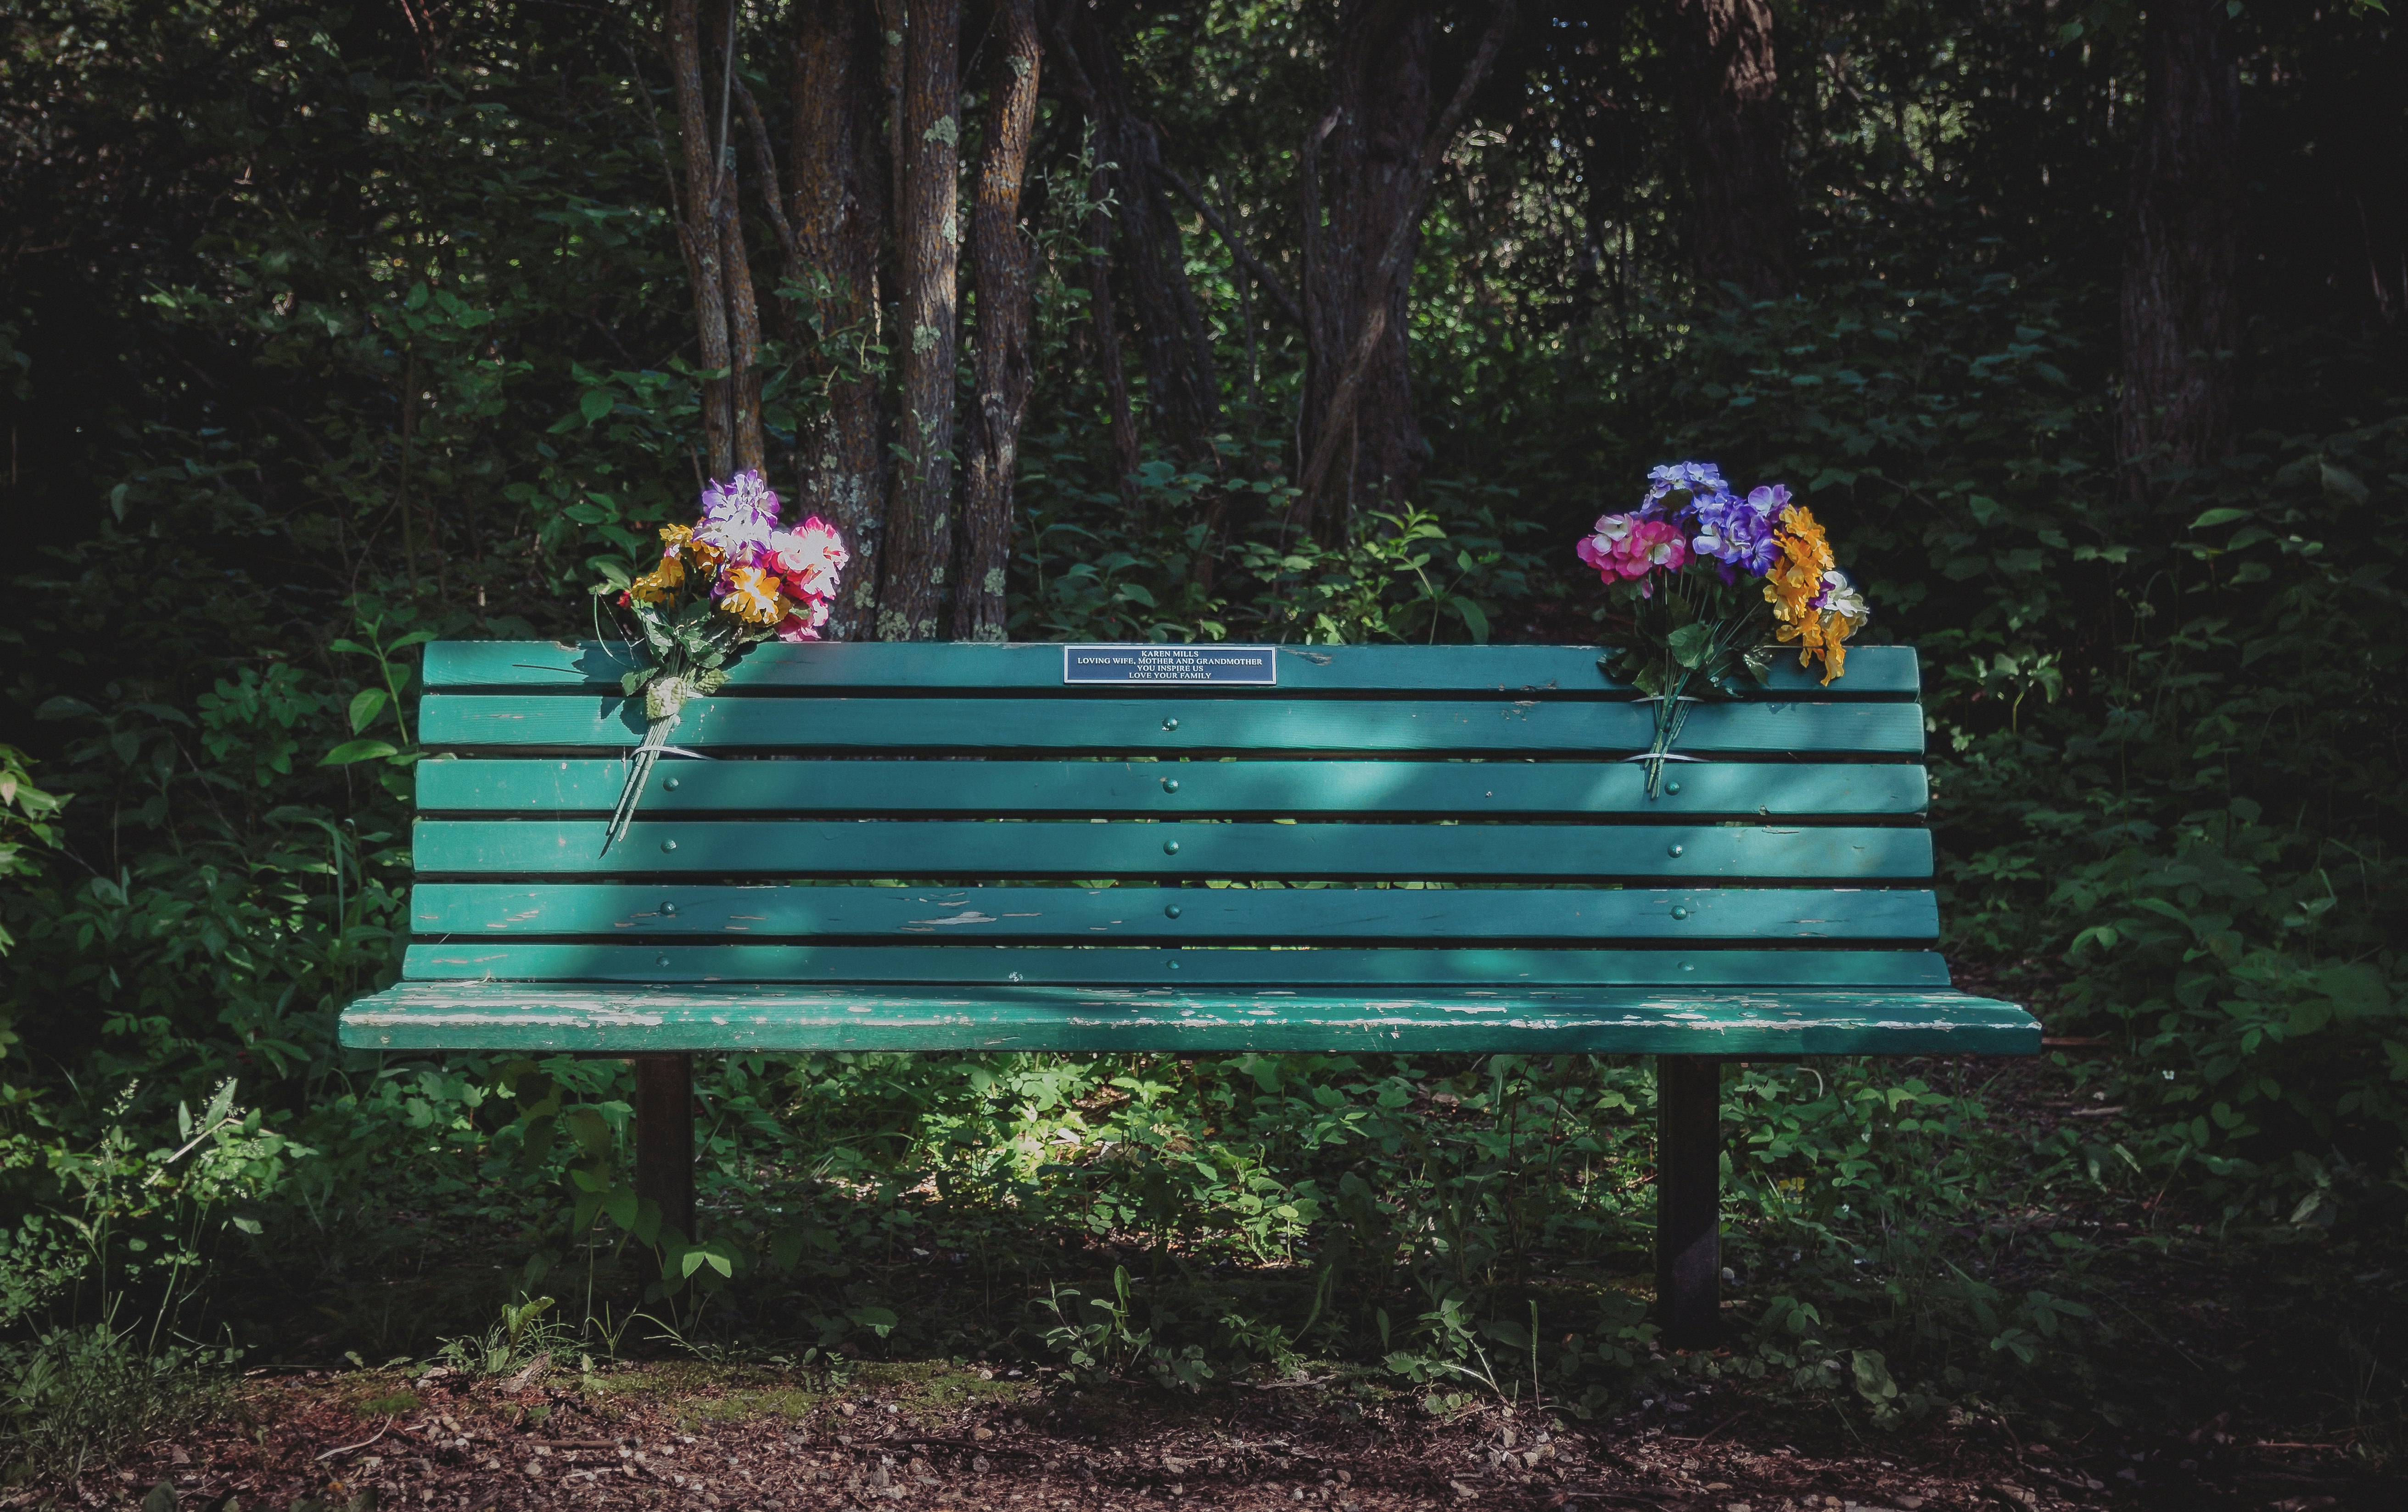 green wooden bench and flowers at daytime